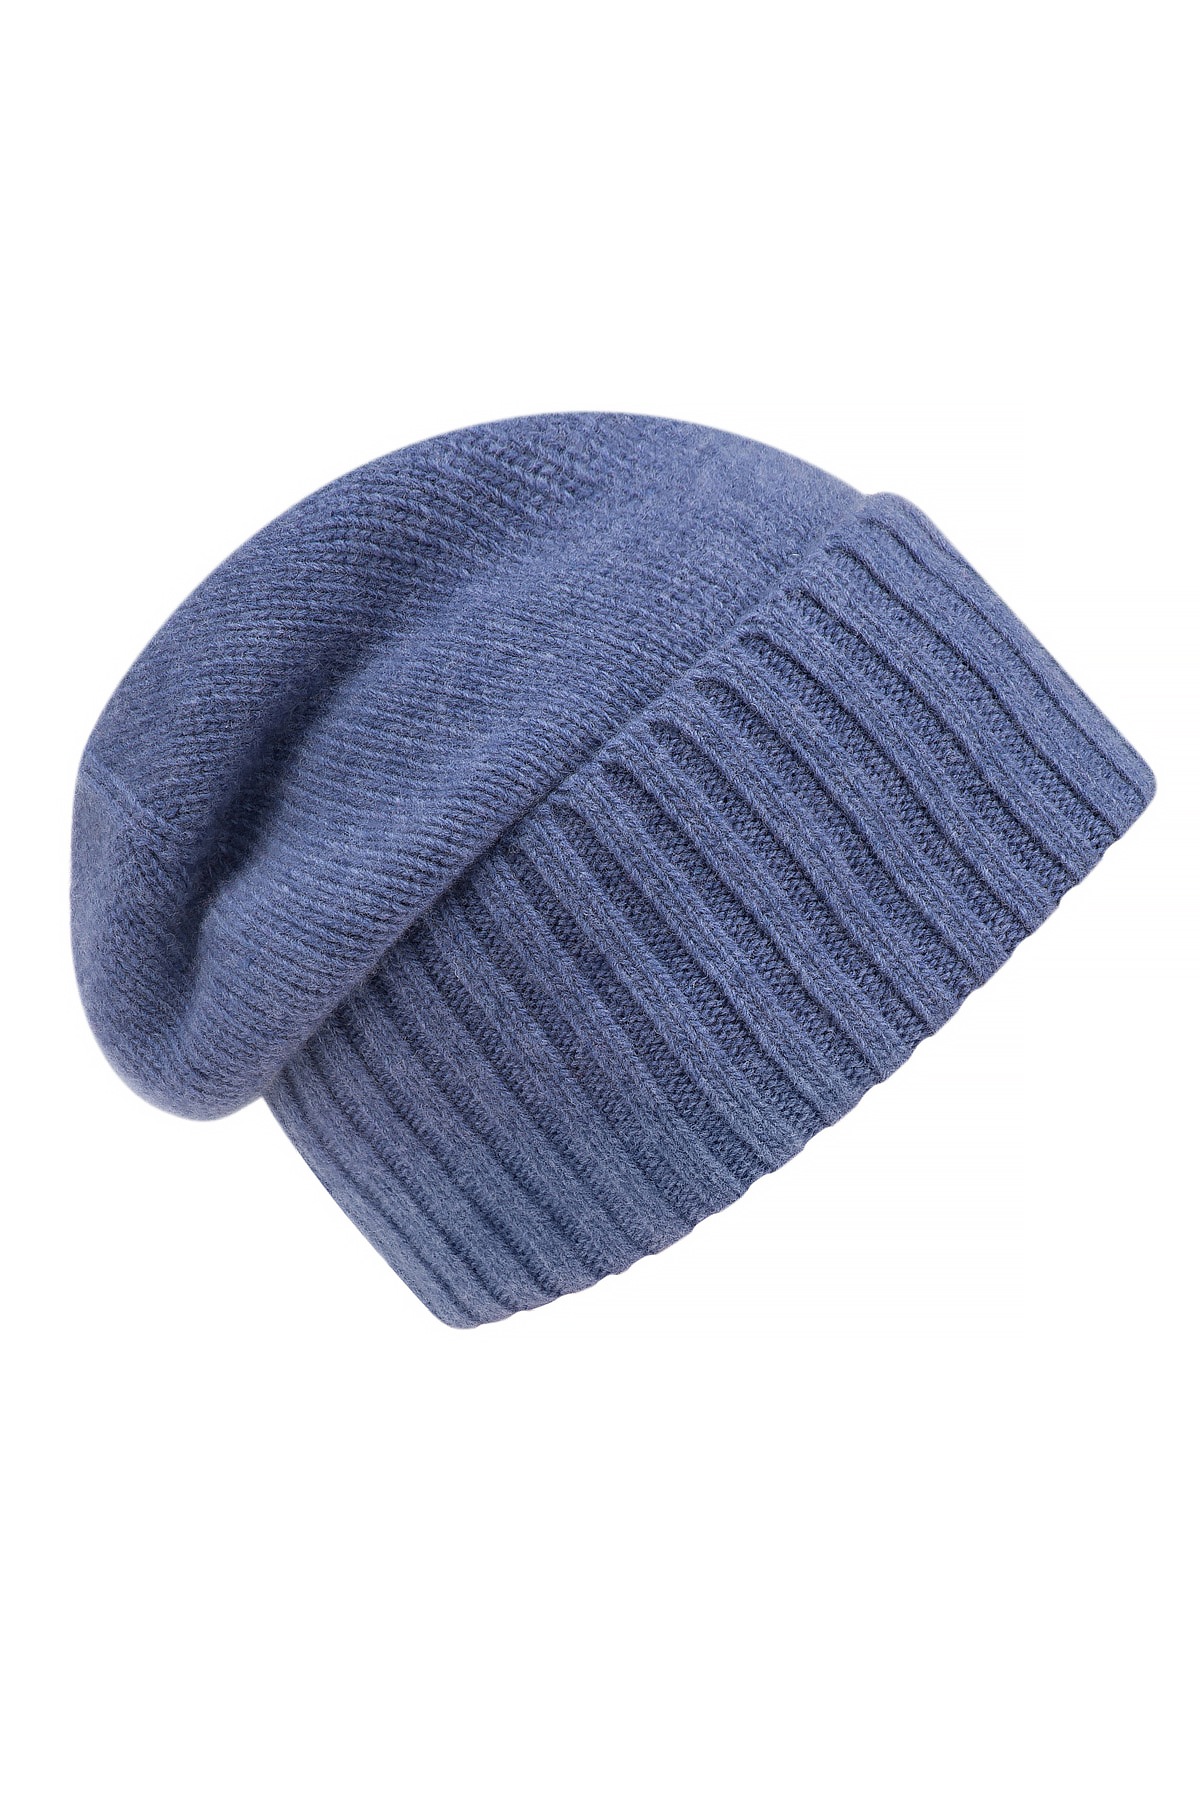 Image of a blue hat